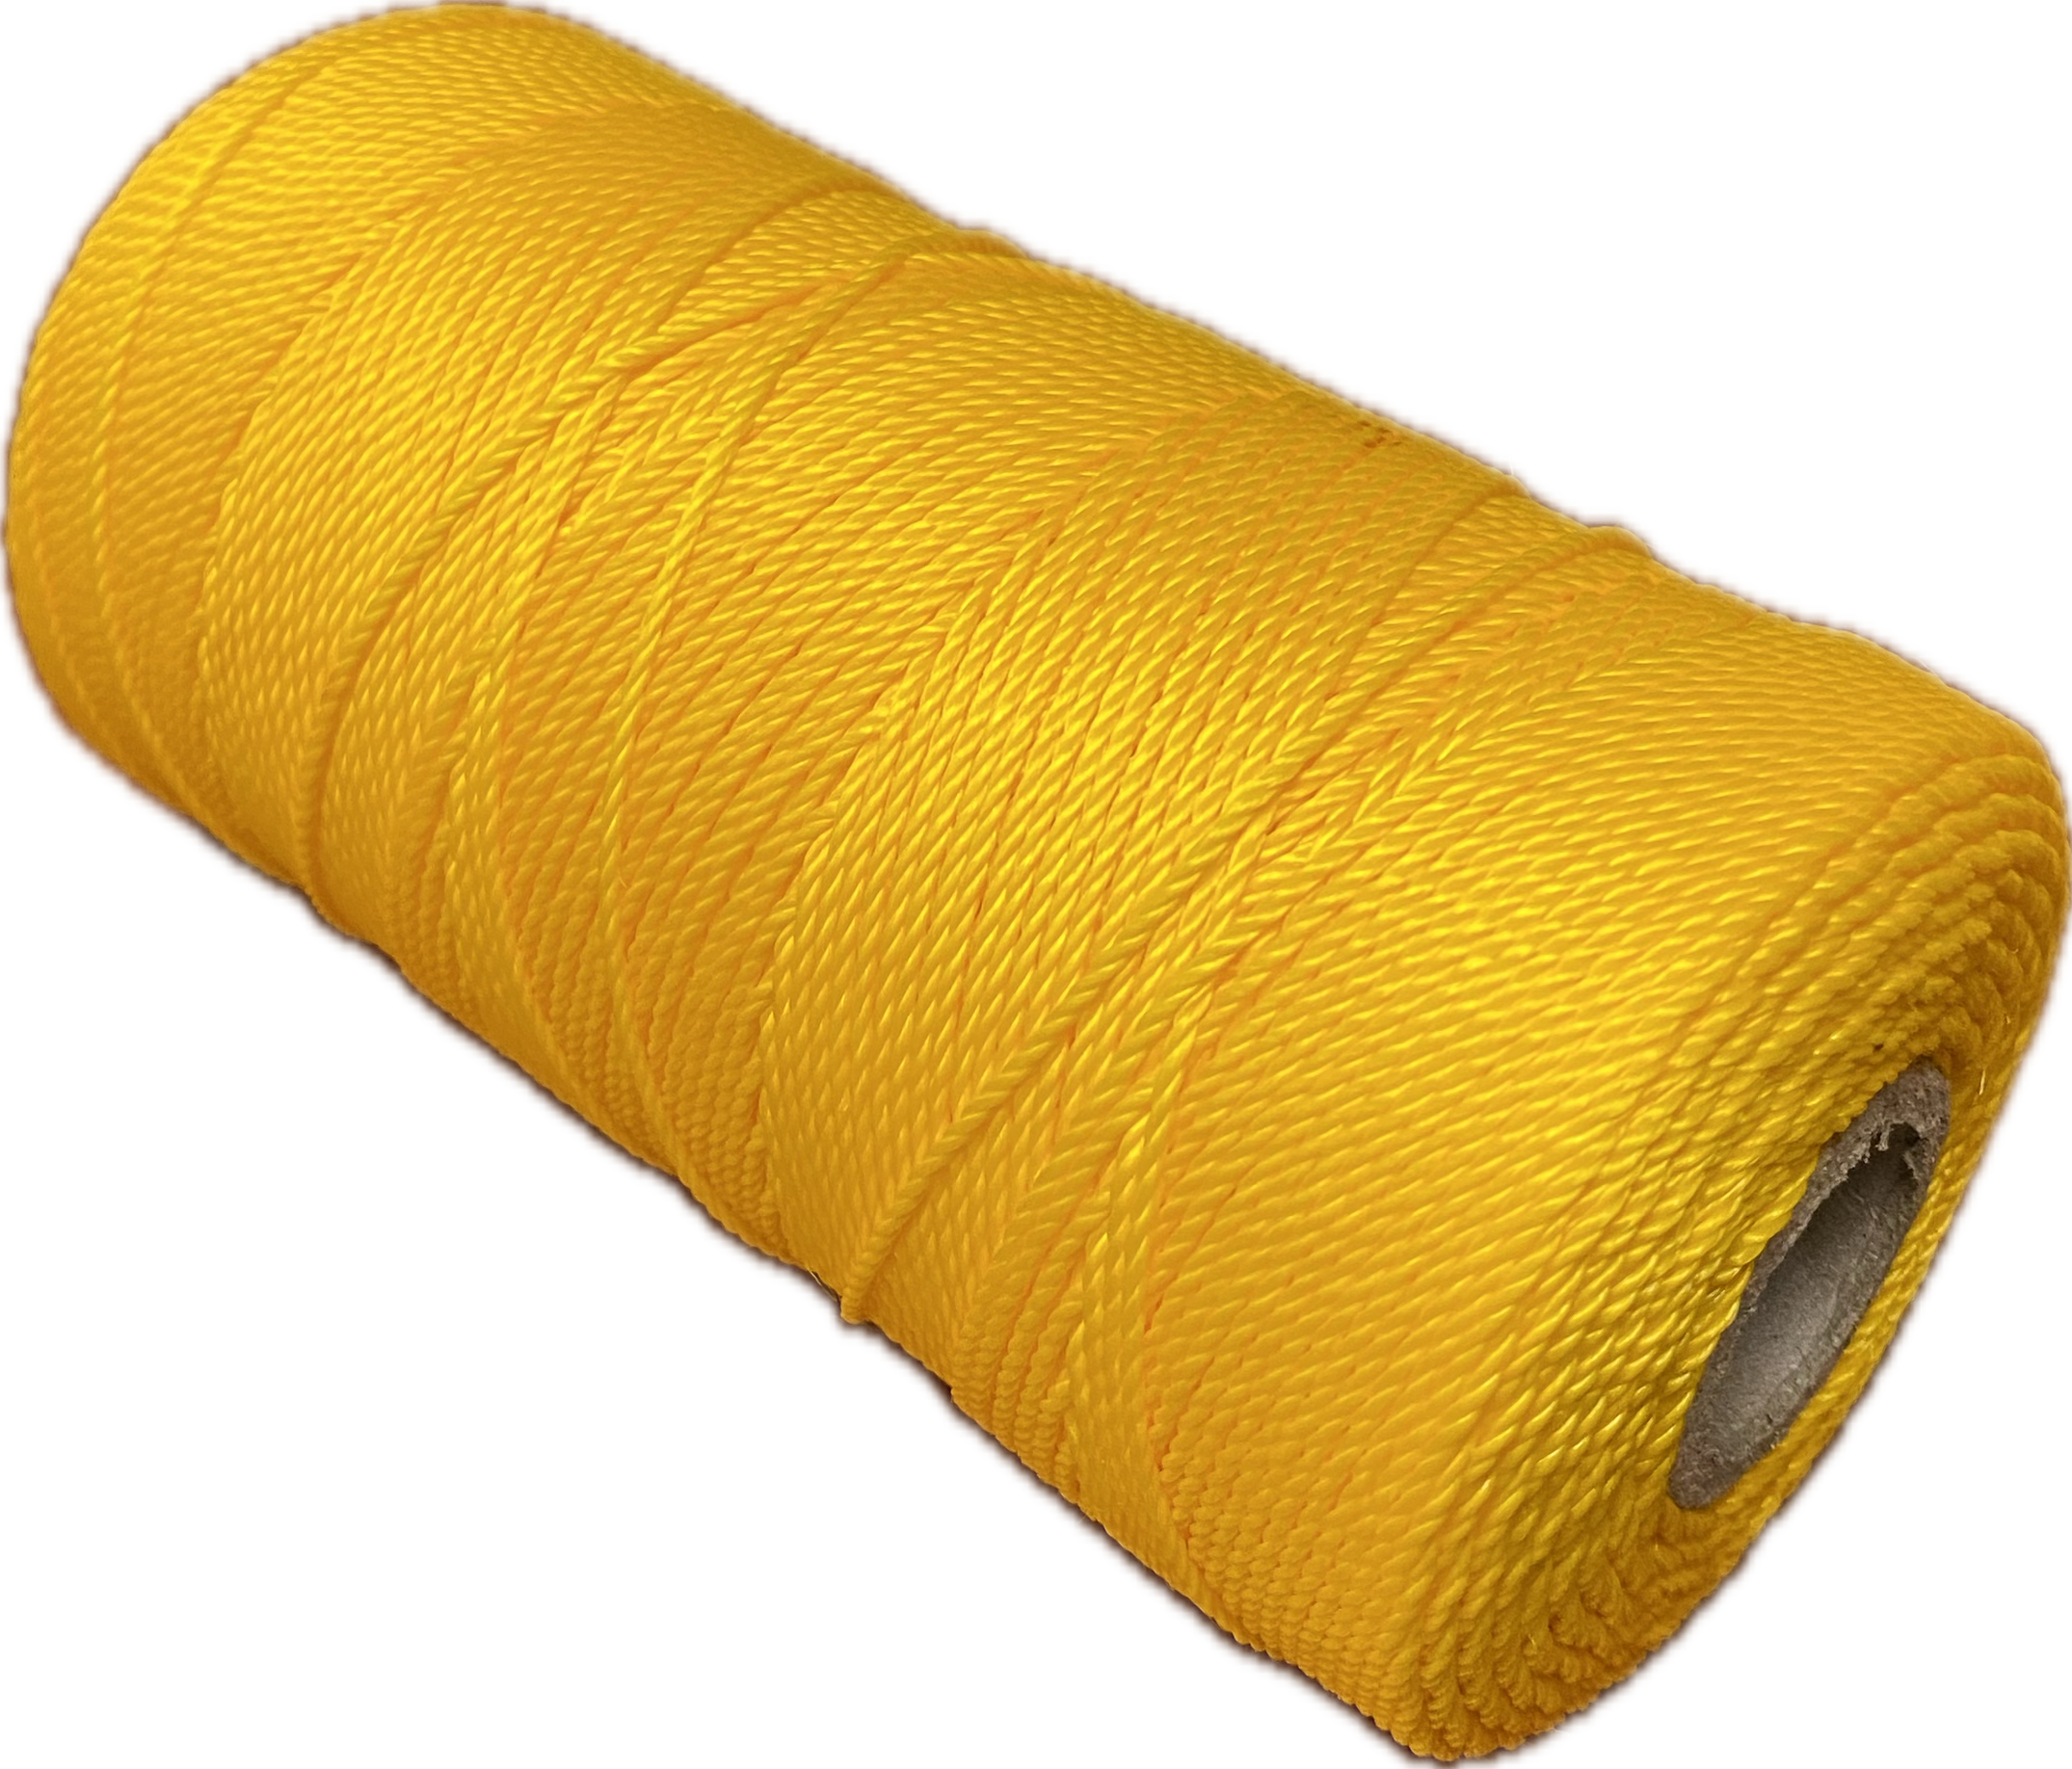 https://www.liveoaksupply.com/CatalogImages/12-124-18-1090ft-yellow-string-line.png